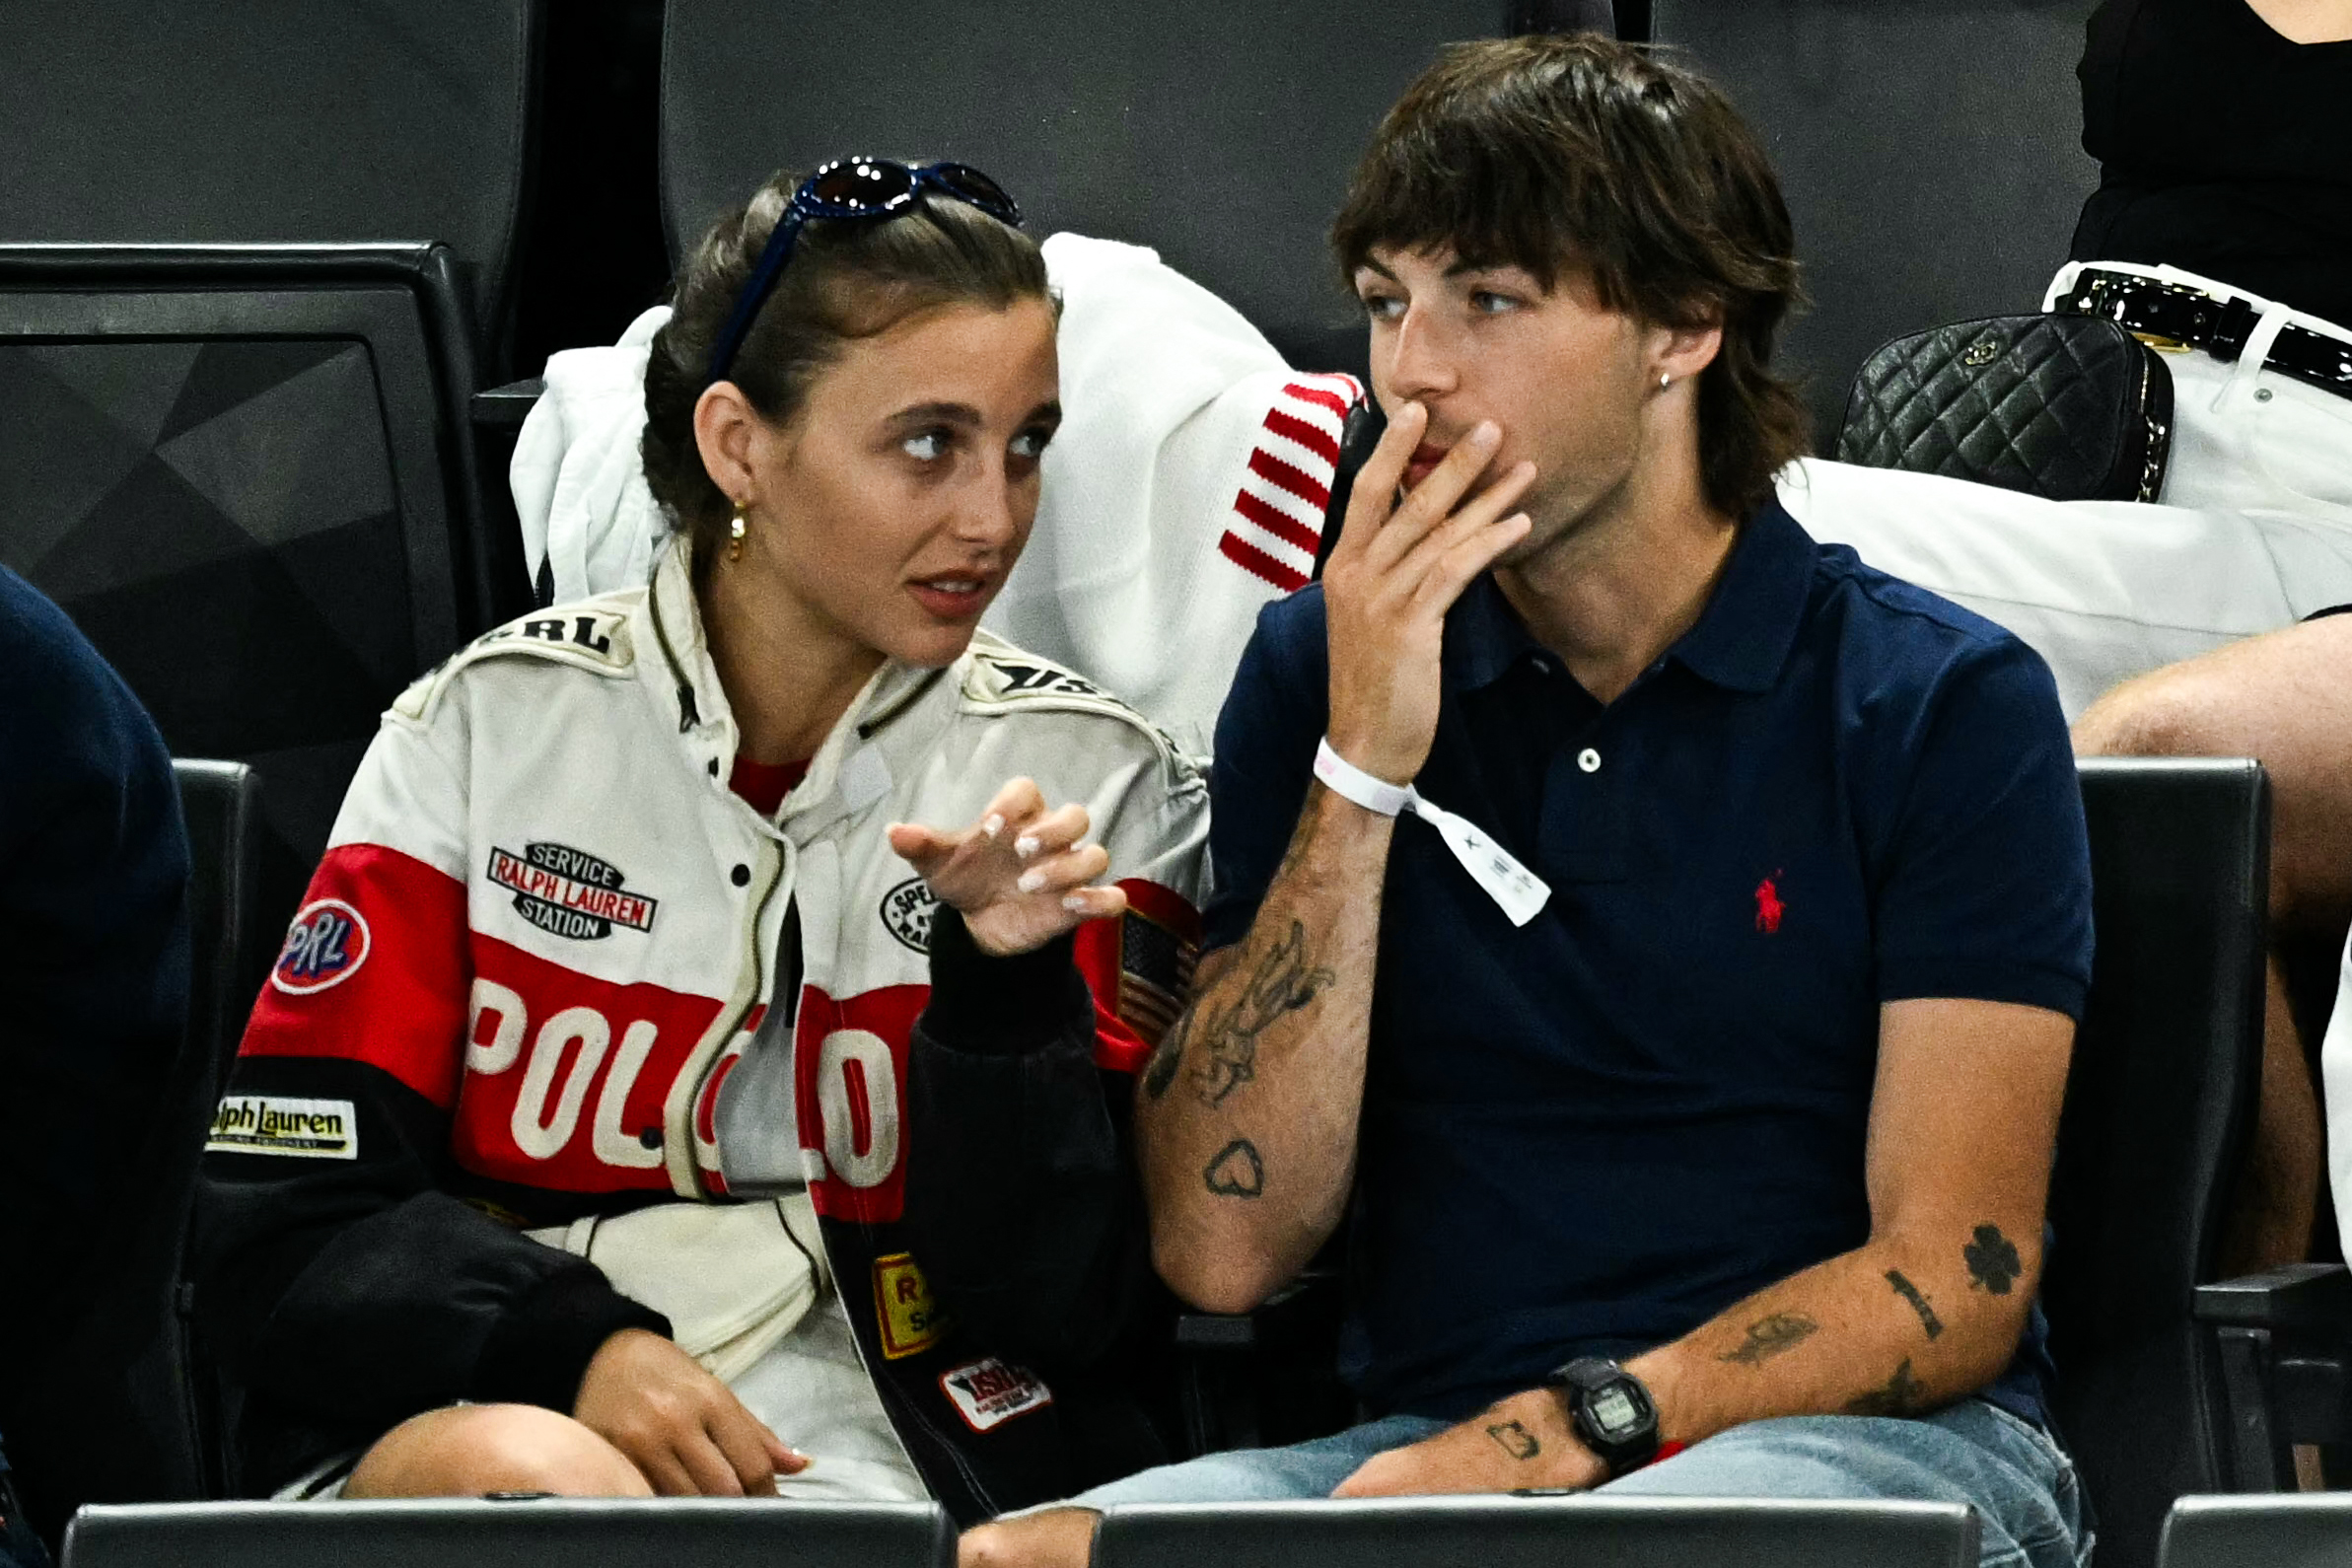 Emma Chamberland and Peter McPoland seemingly confirmed their relationship with matching outfits while watching the Olympics together in Paris, France